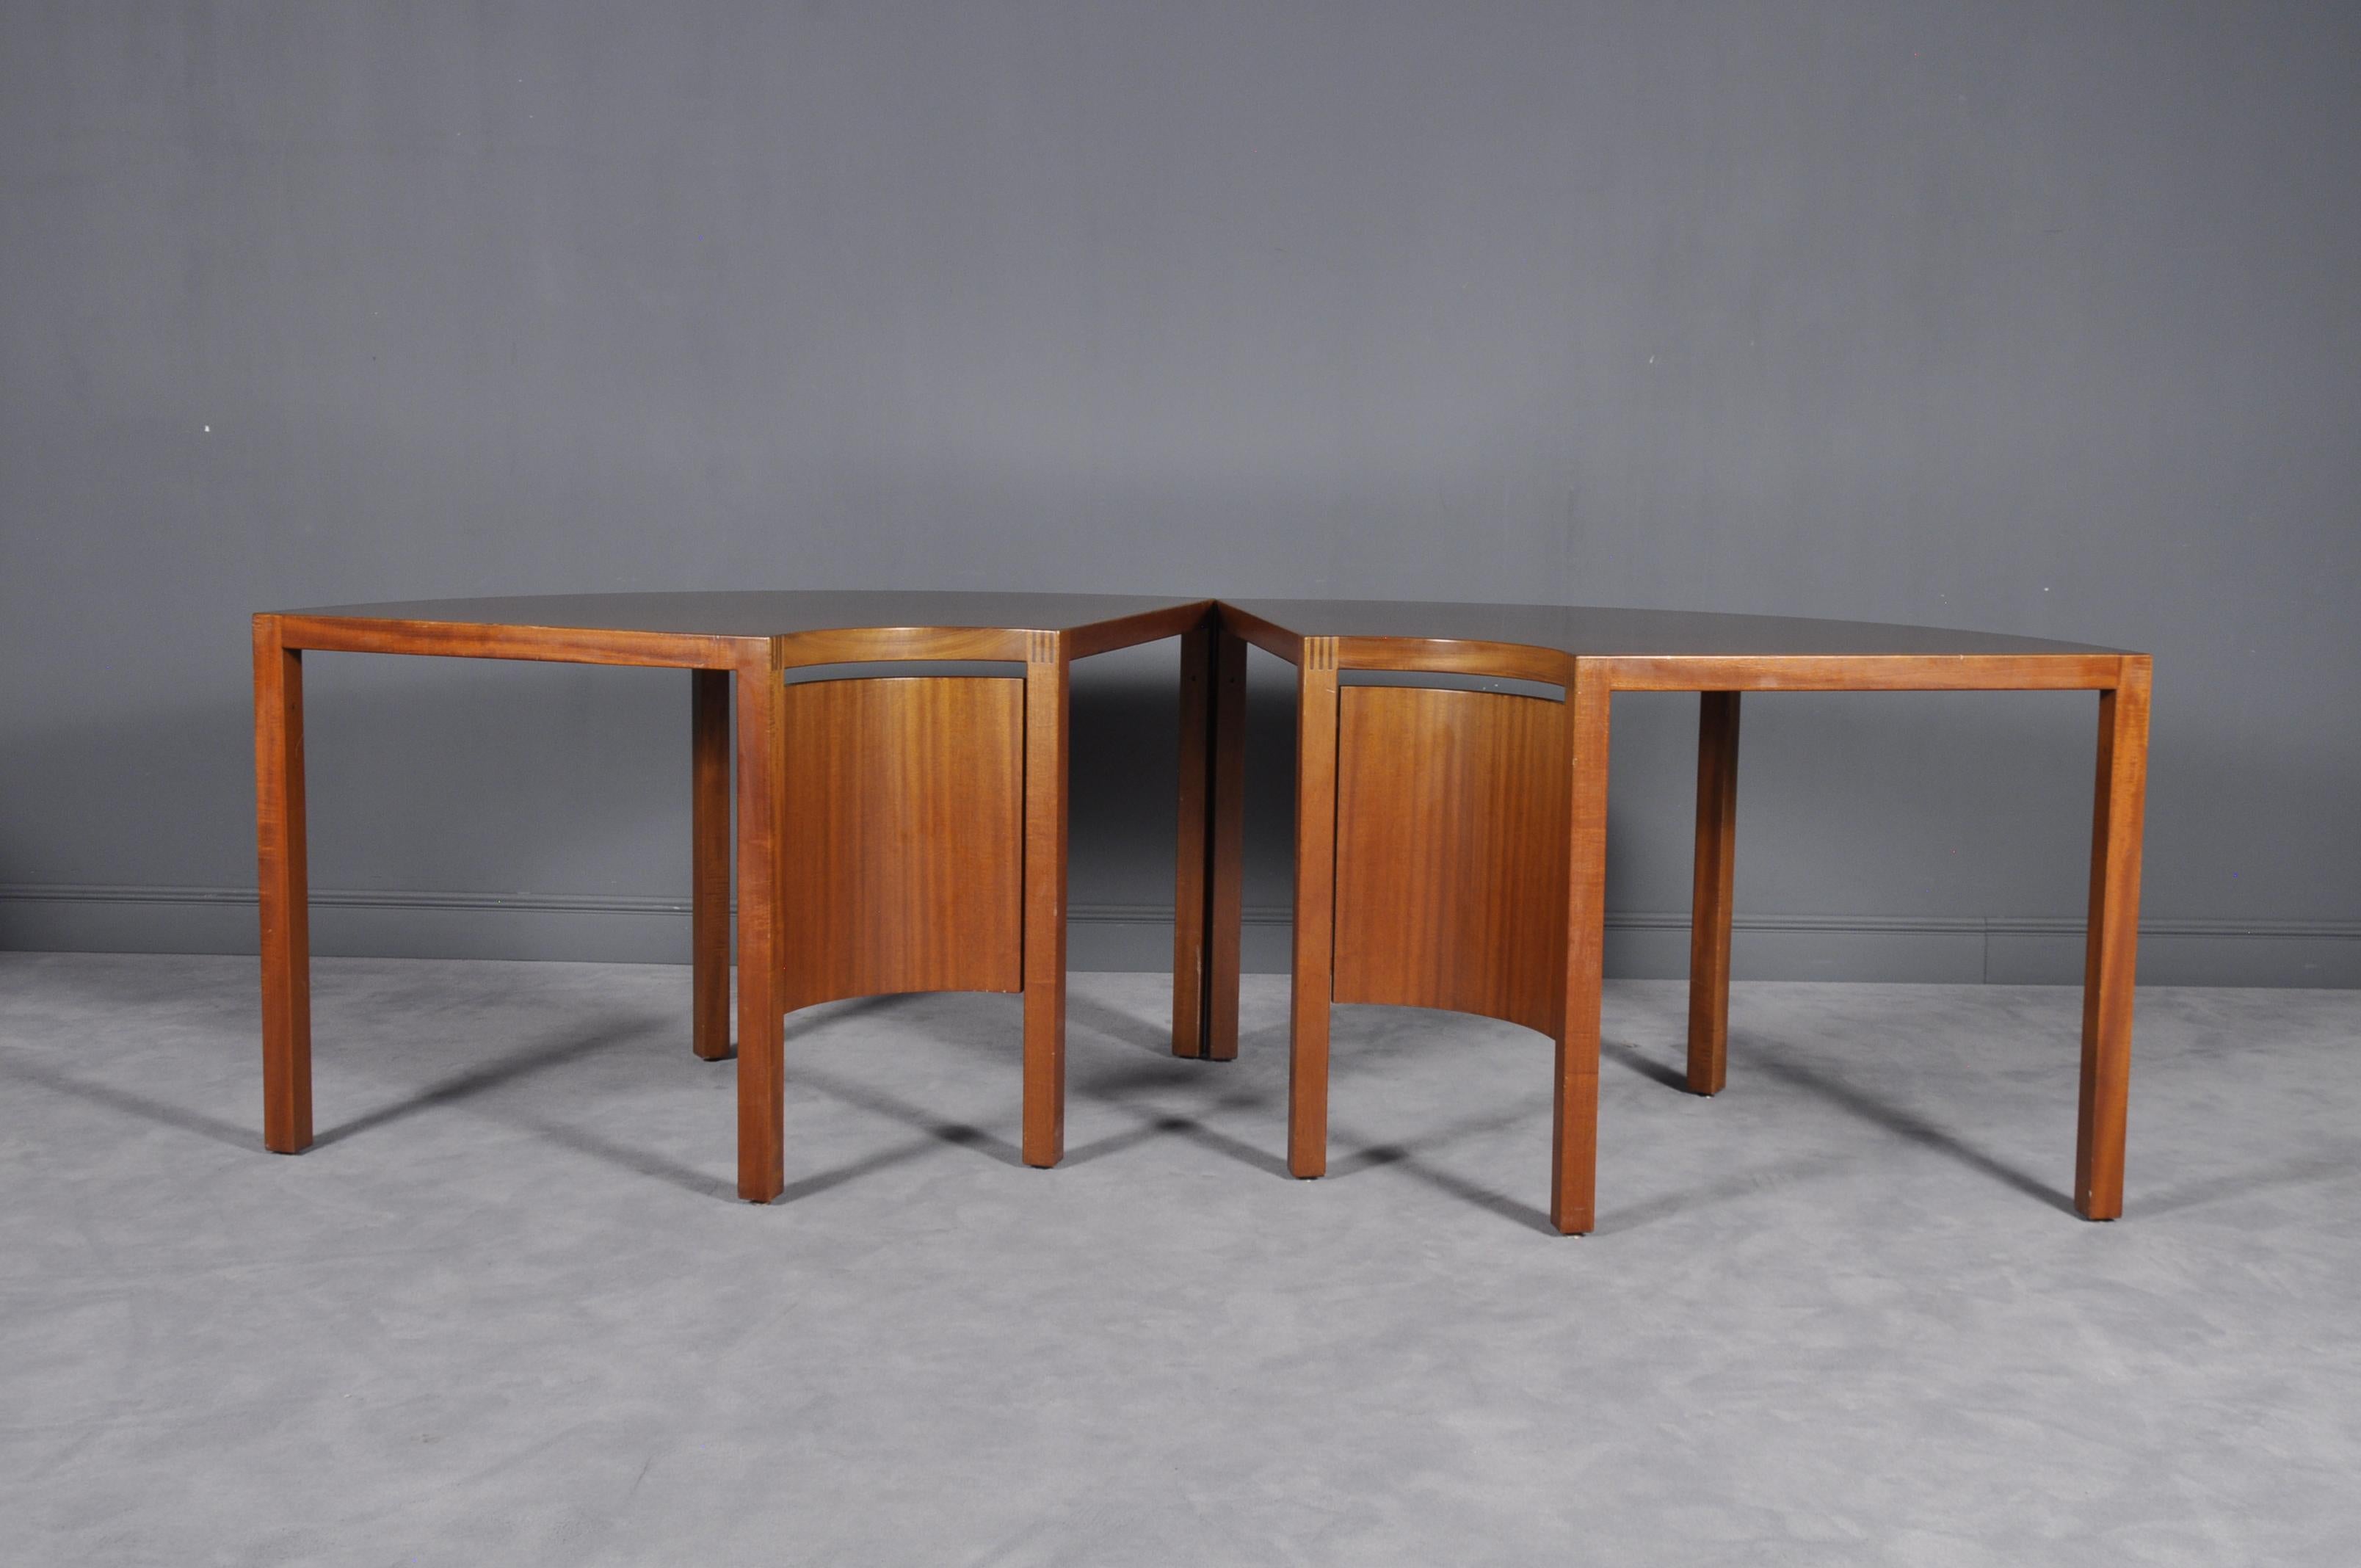 Conference Table and Eight “Riksdagen” Chairs by Åke Axelsson for Gärsnäs, 1981 For Sale 2